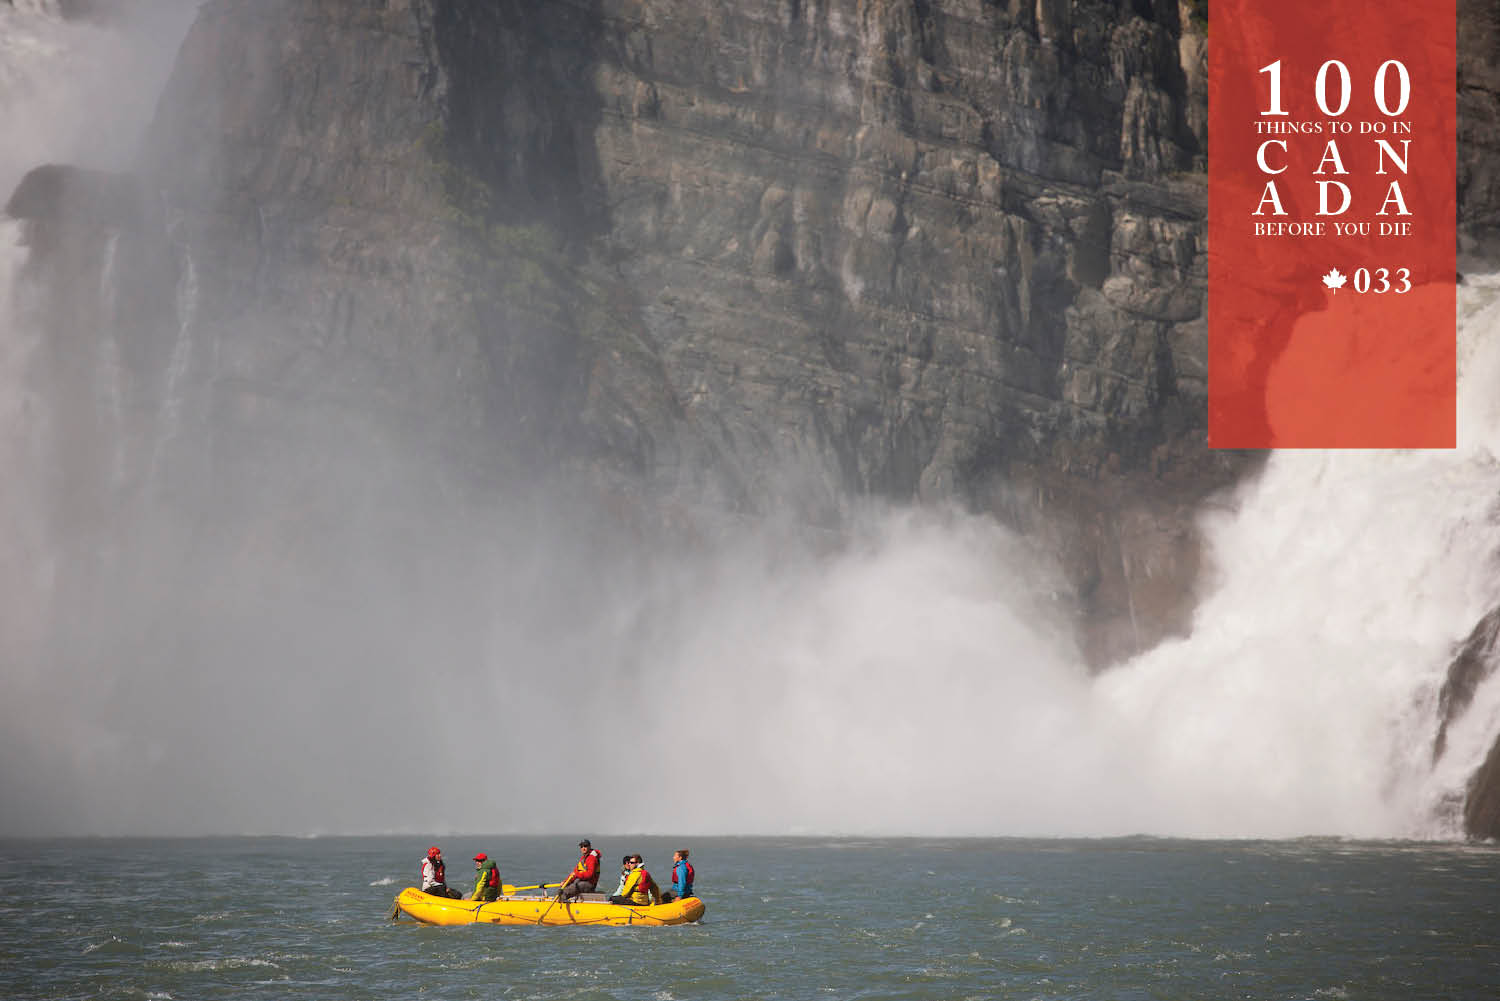 Glacier alley: Rafting down Canada’s wildest rivers